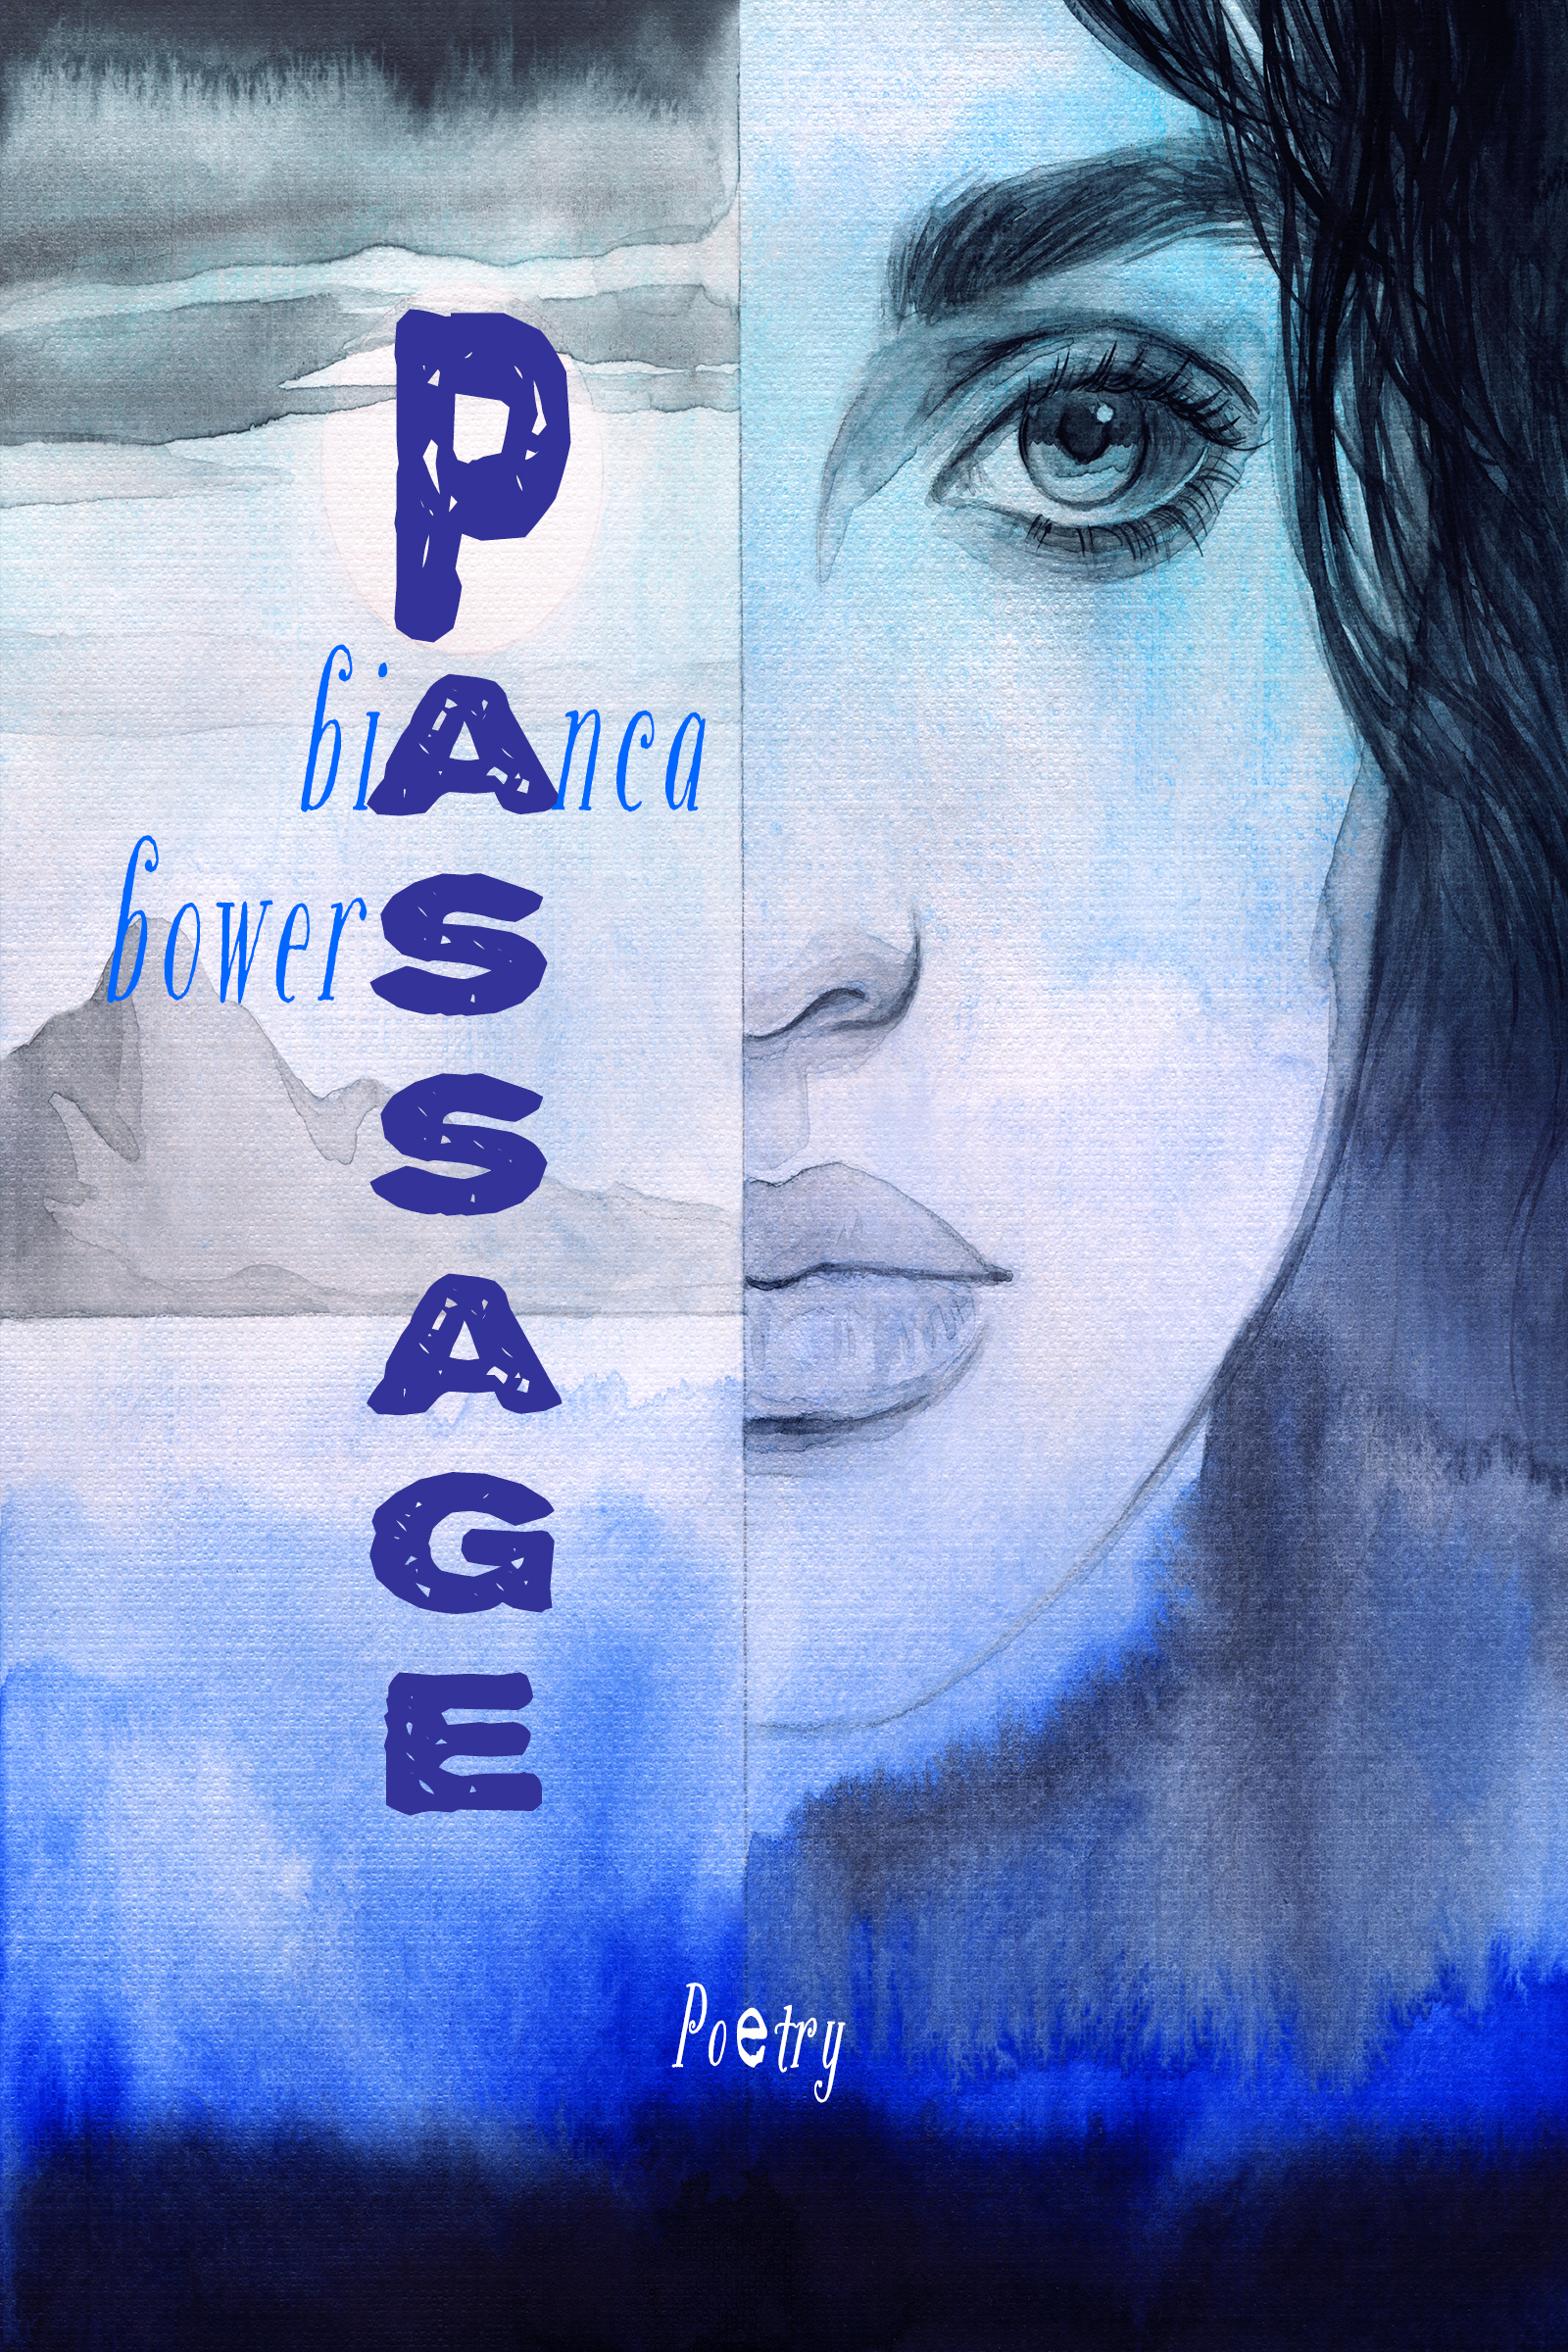 passage-poetry-bianca-bowers-books